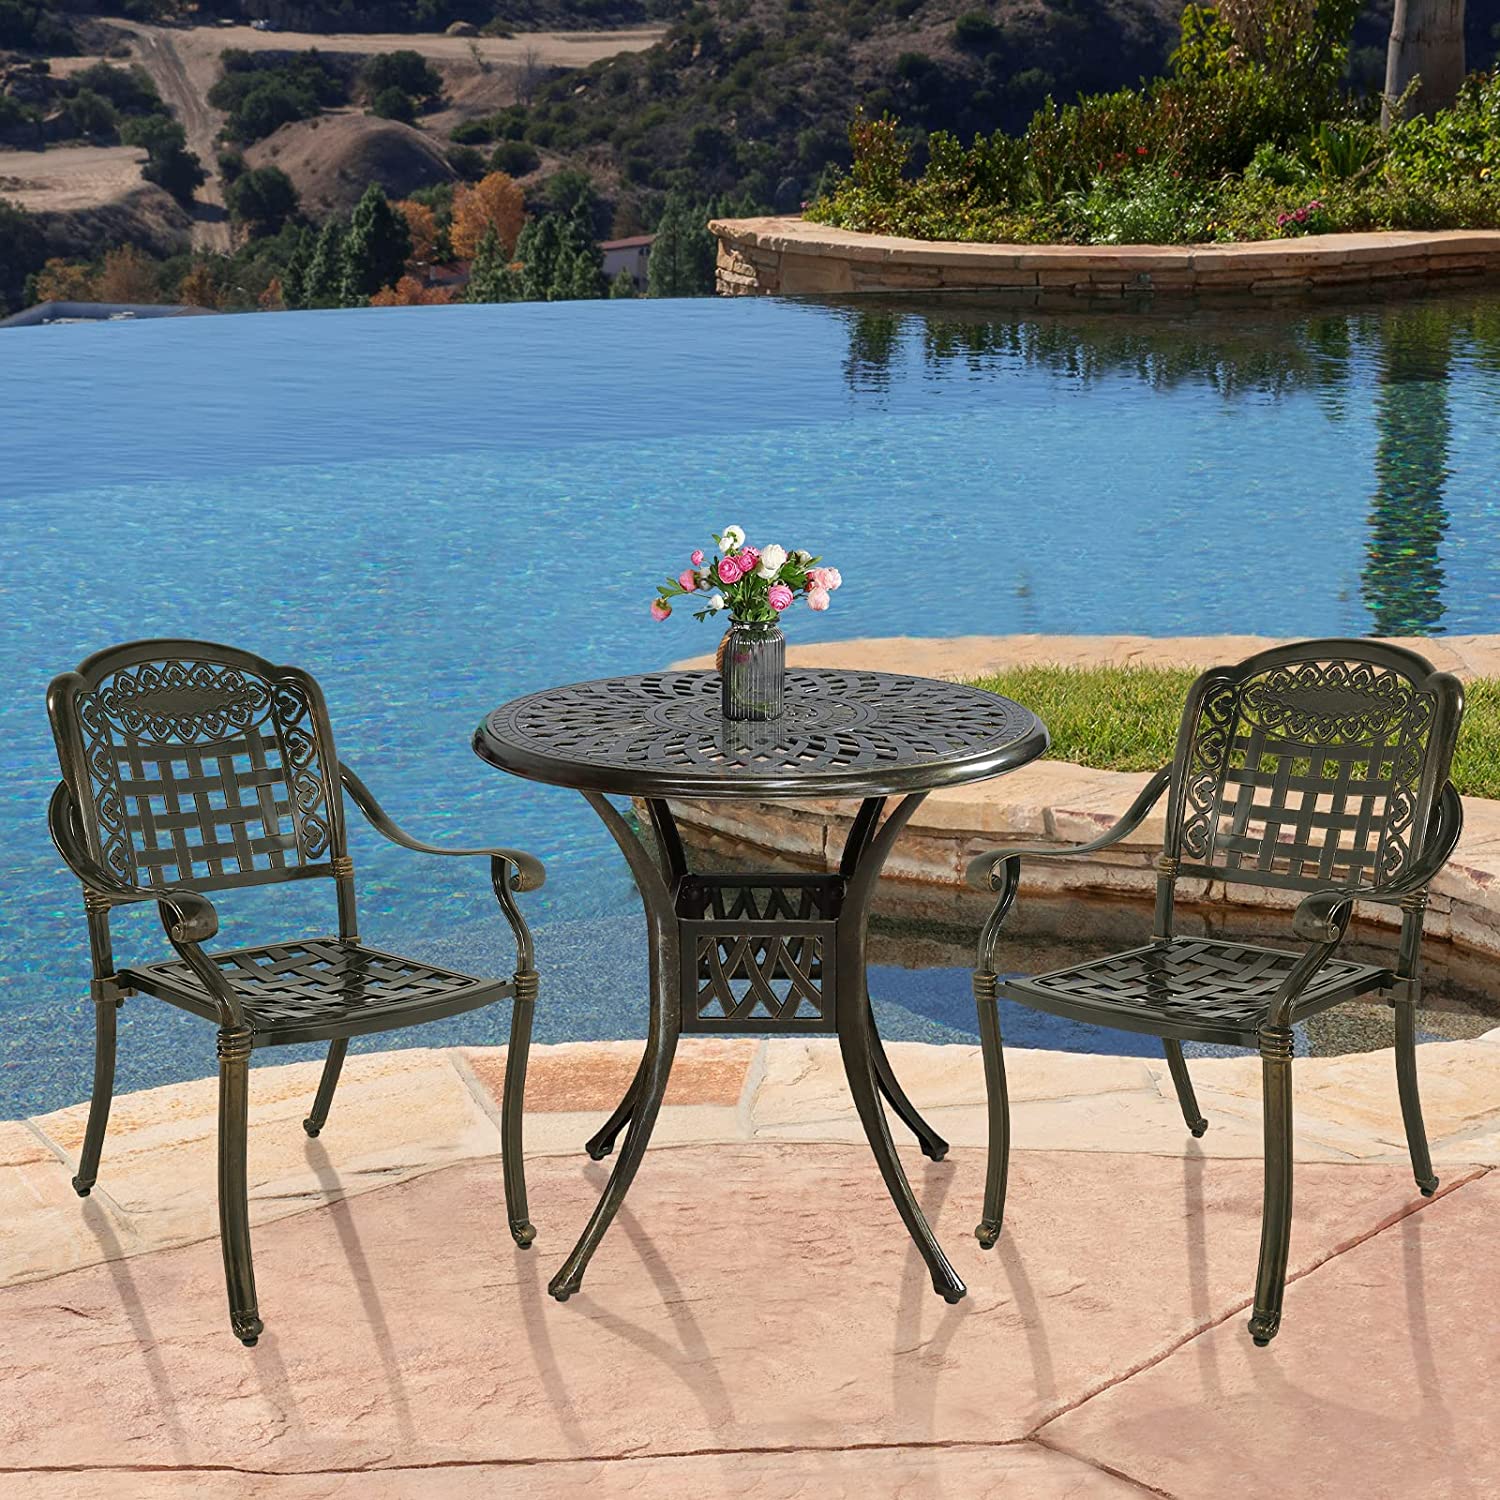 SOCIALCOMFY 3-Piece Outdoor Patio Dining Set, All-Weather Cast Aluminum Furniture Conversation Set, Include 2 Chairs and a 31 inch Round Table with Umbrella Hole for Balcony Lawn Garden Backyard - image 1 of 7